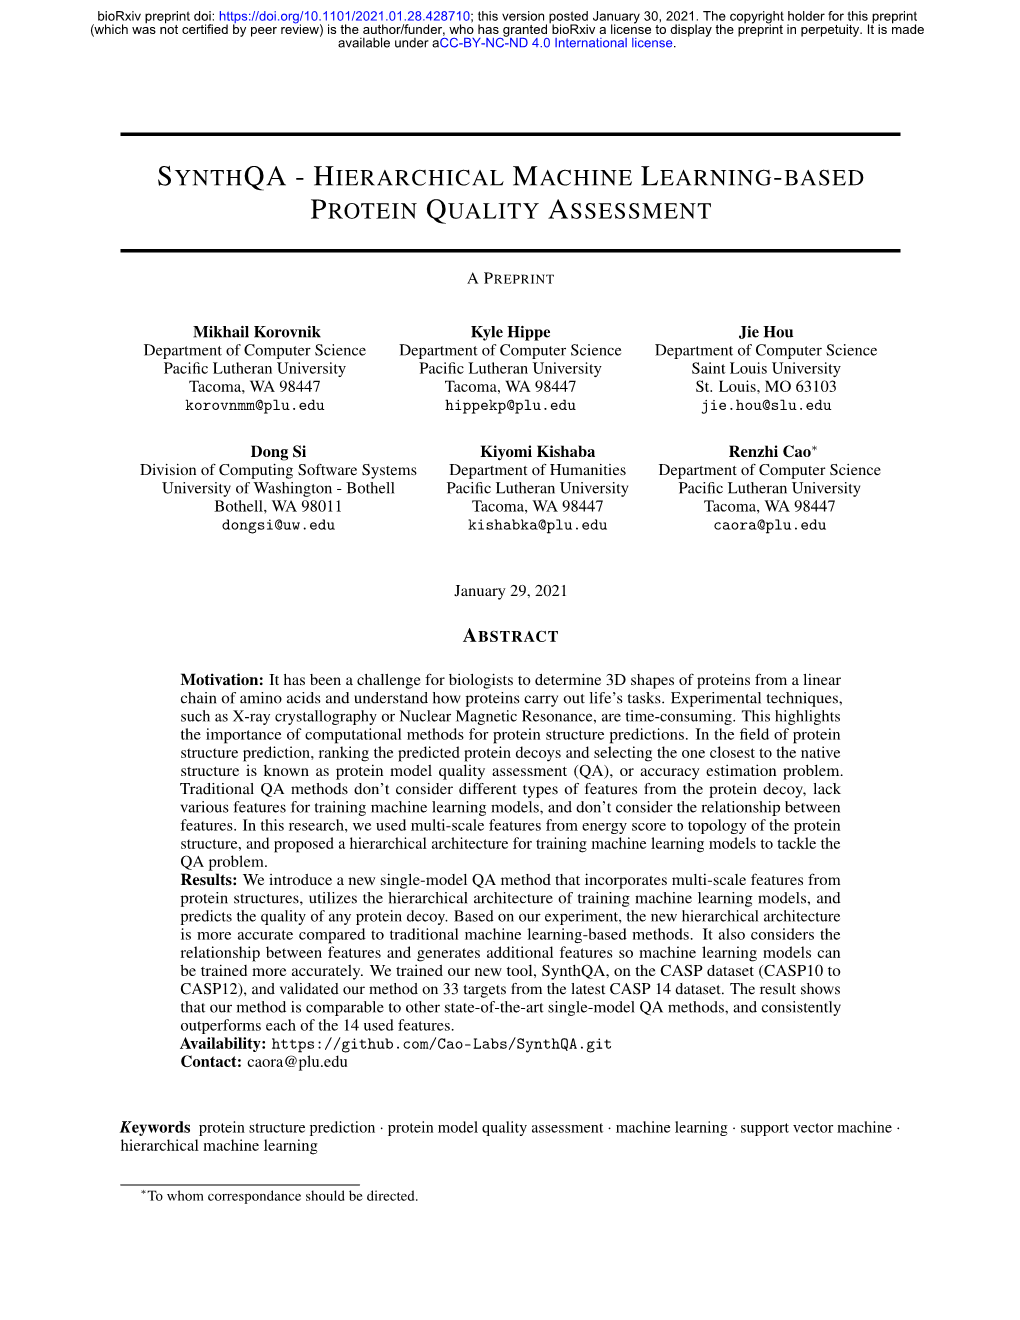 Synthqa-Hierarchical Machine Learning-Based Protein Quality Assessment